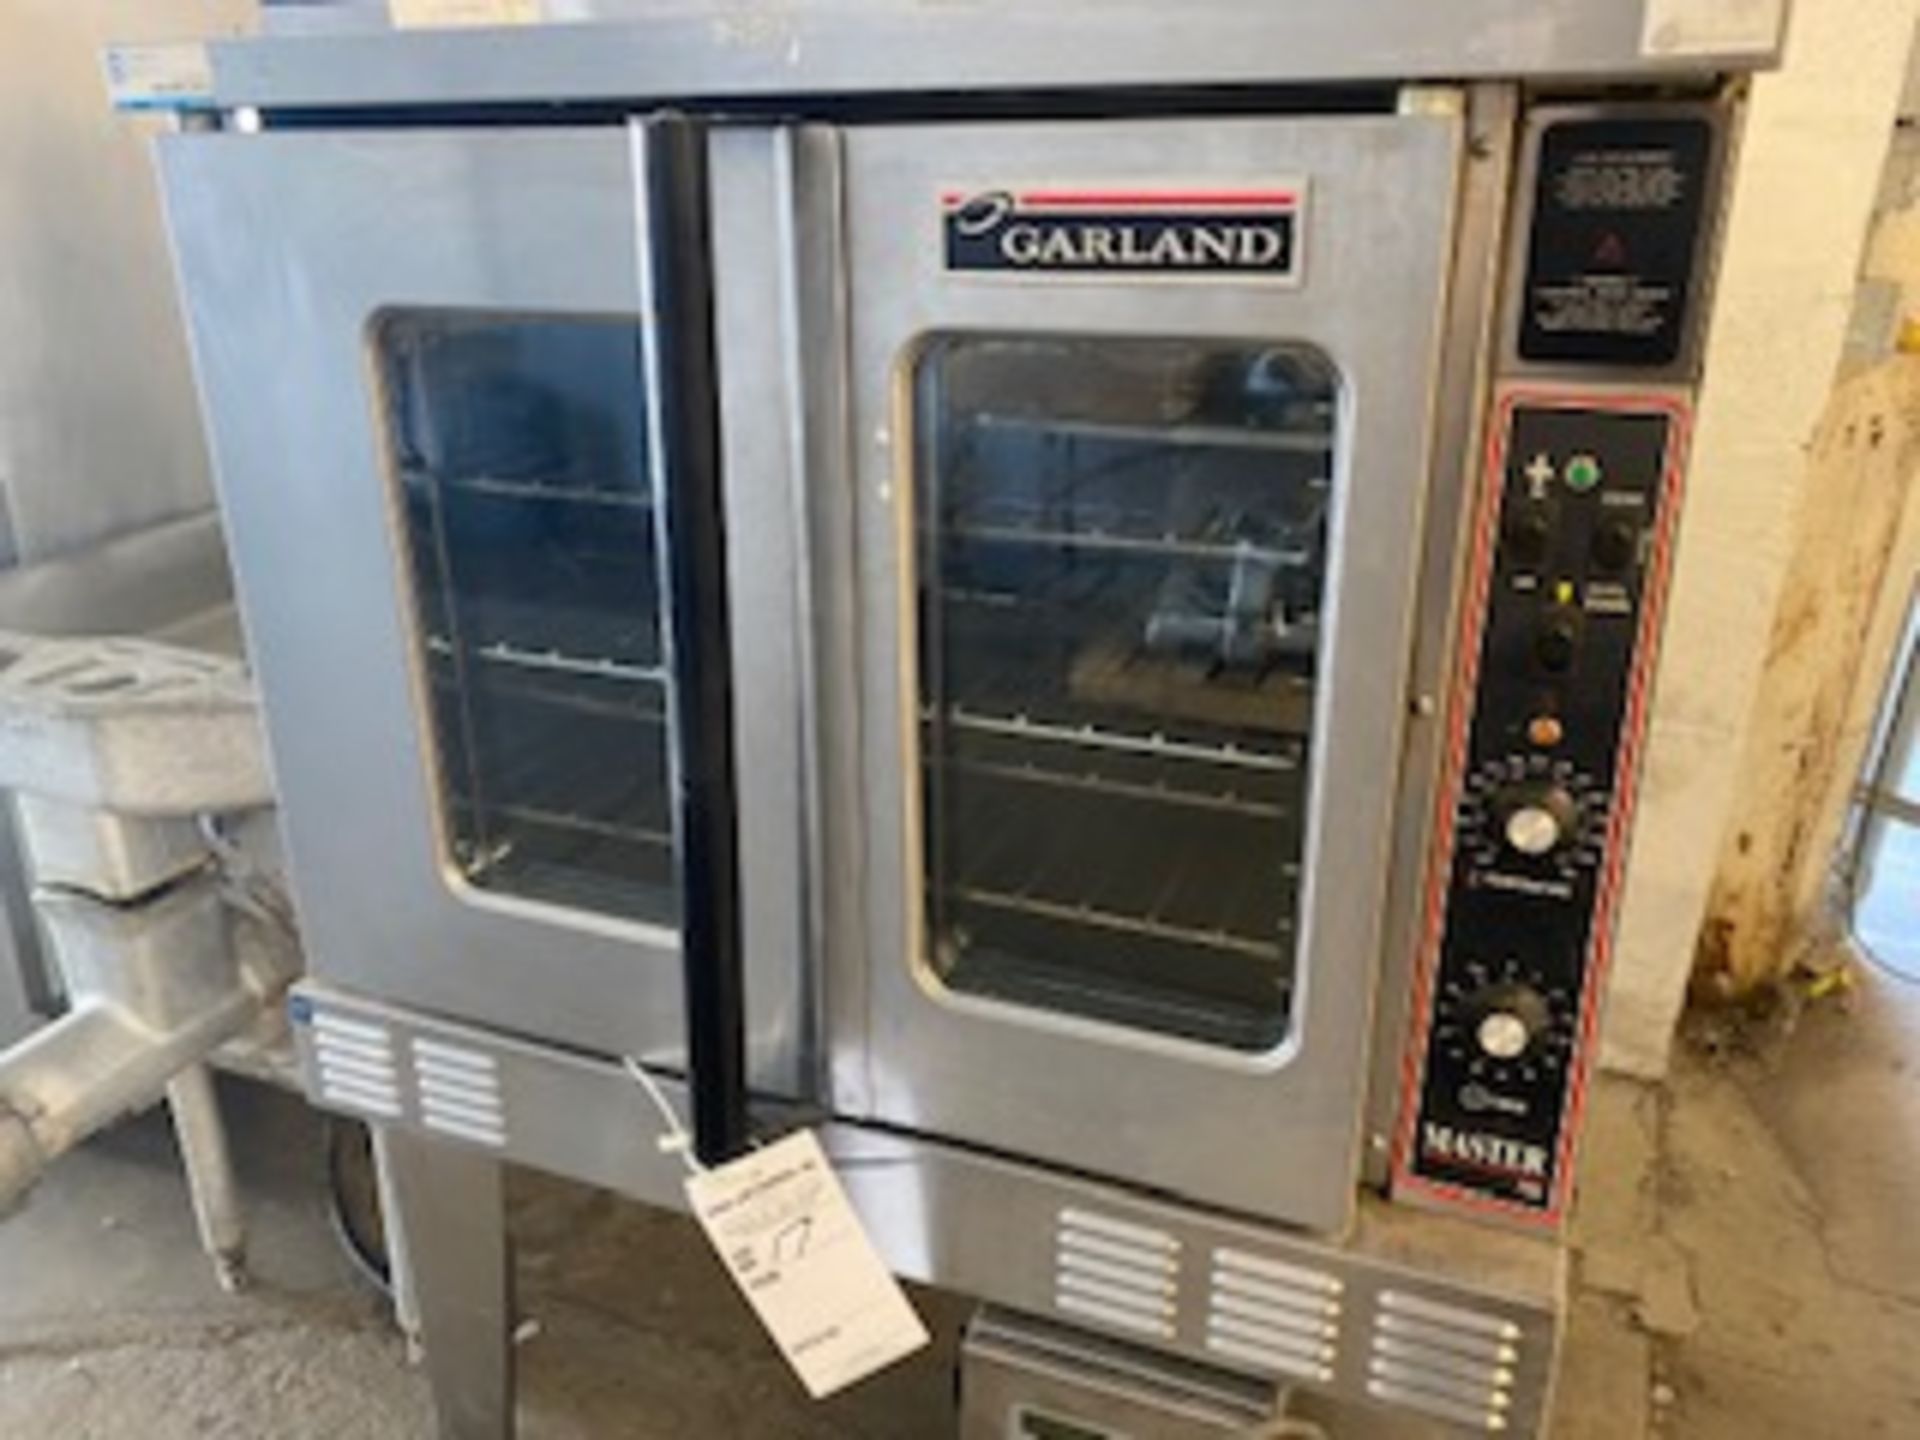 Garland master 200 oven in single or 3 ph, currently set up for 3 phase